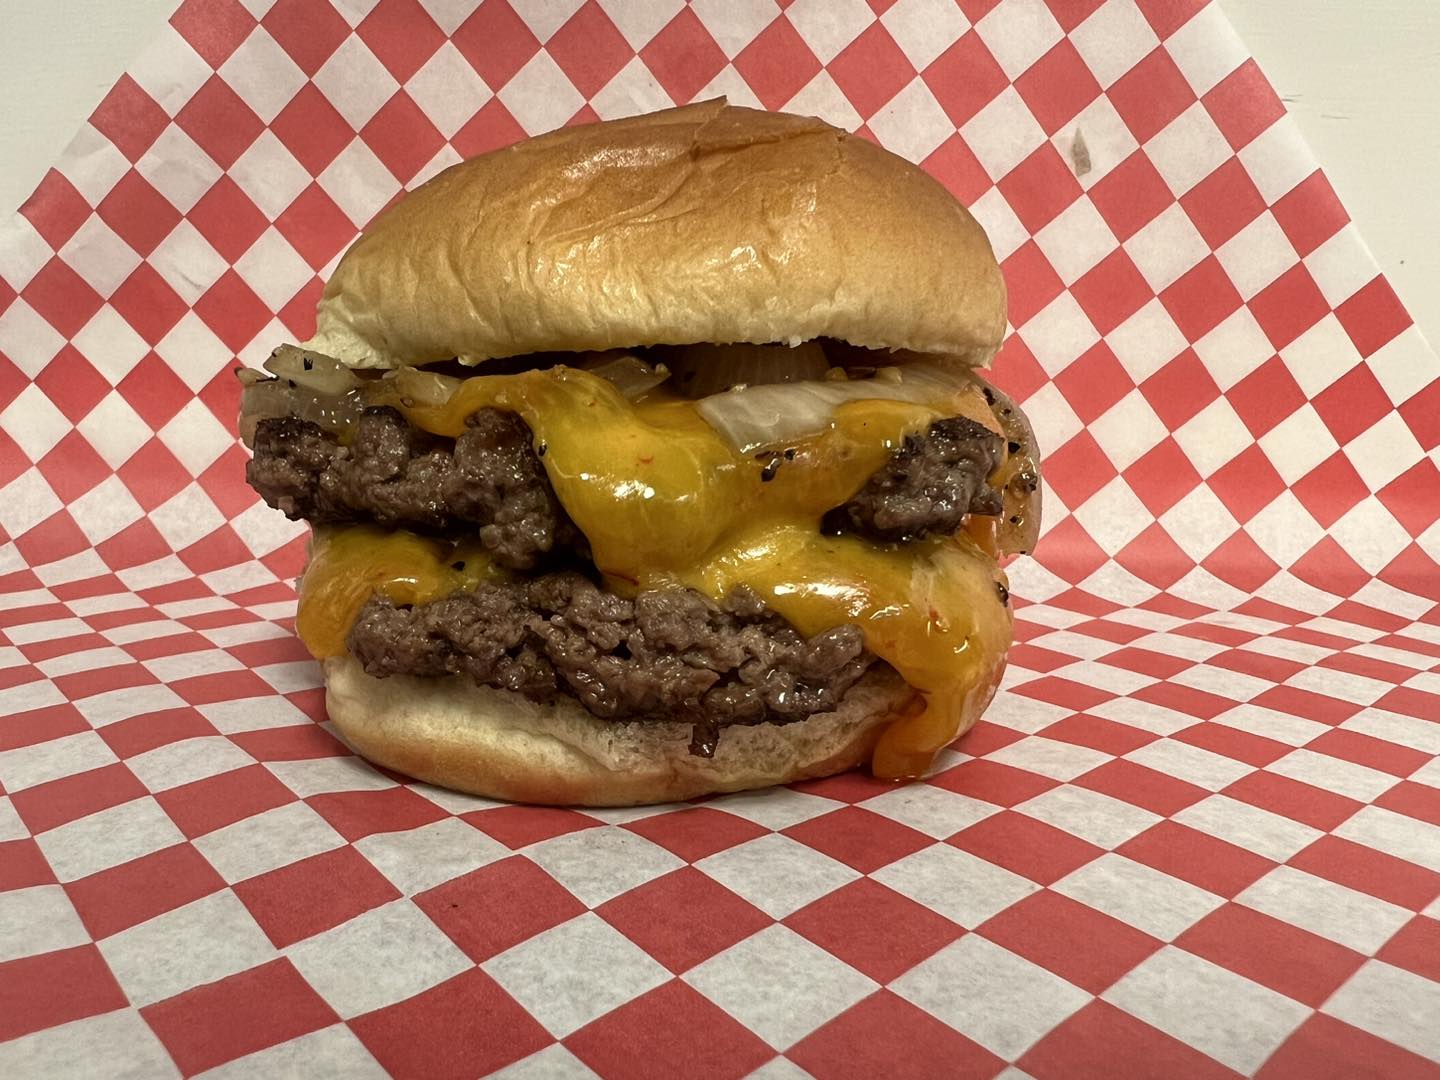 A double cheeseburger from the Burger Bus